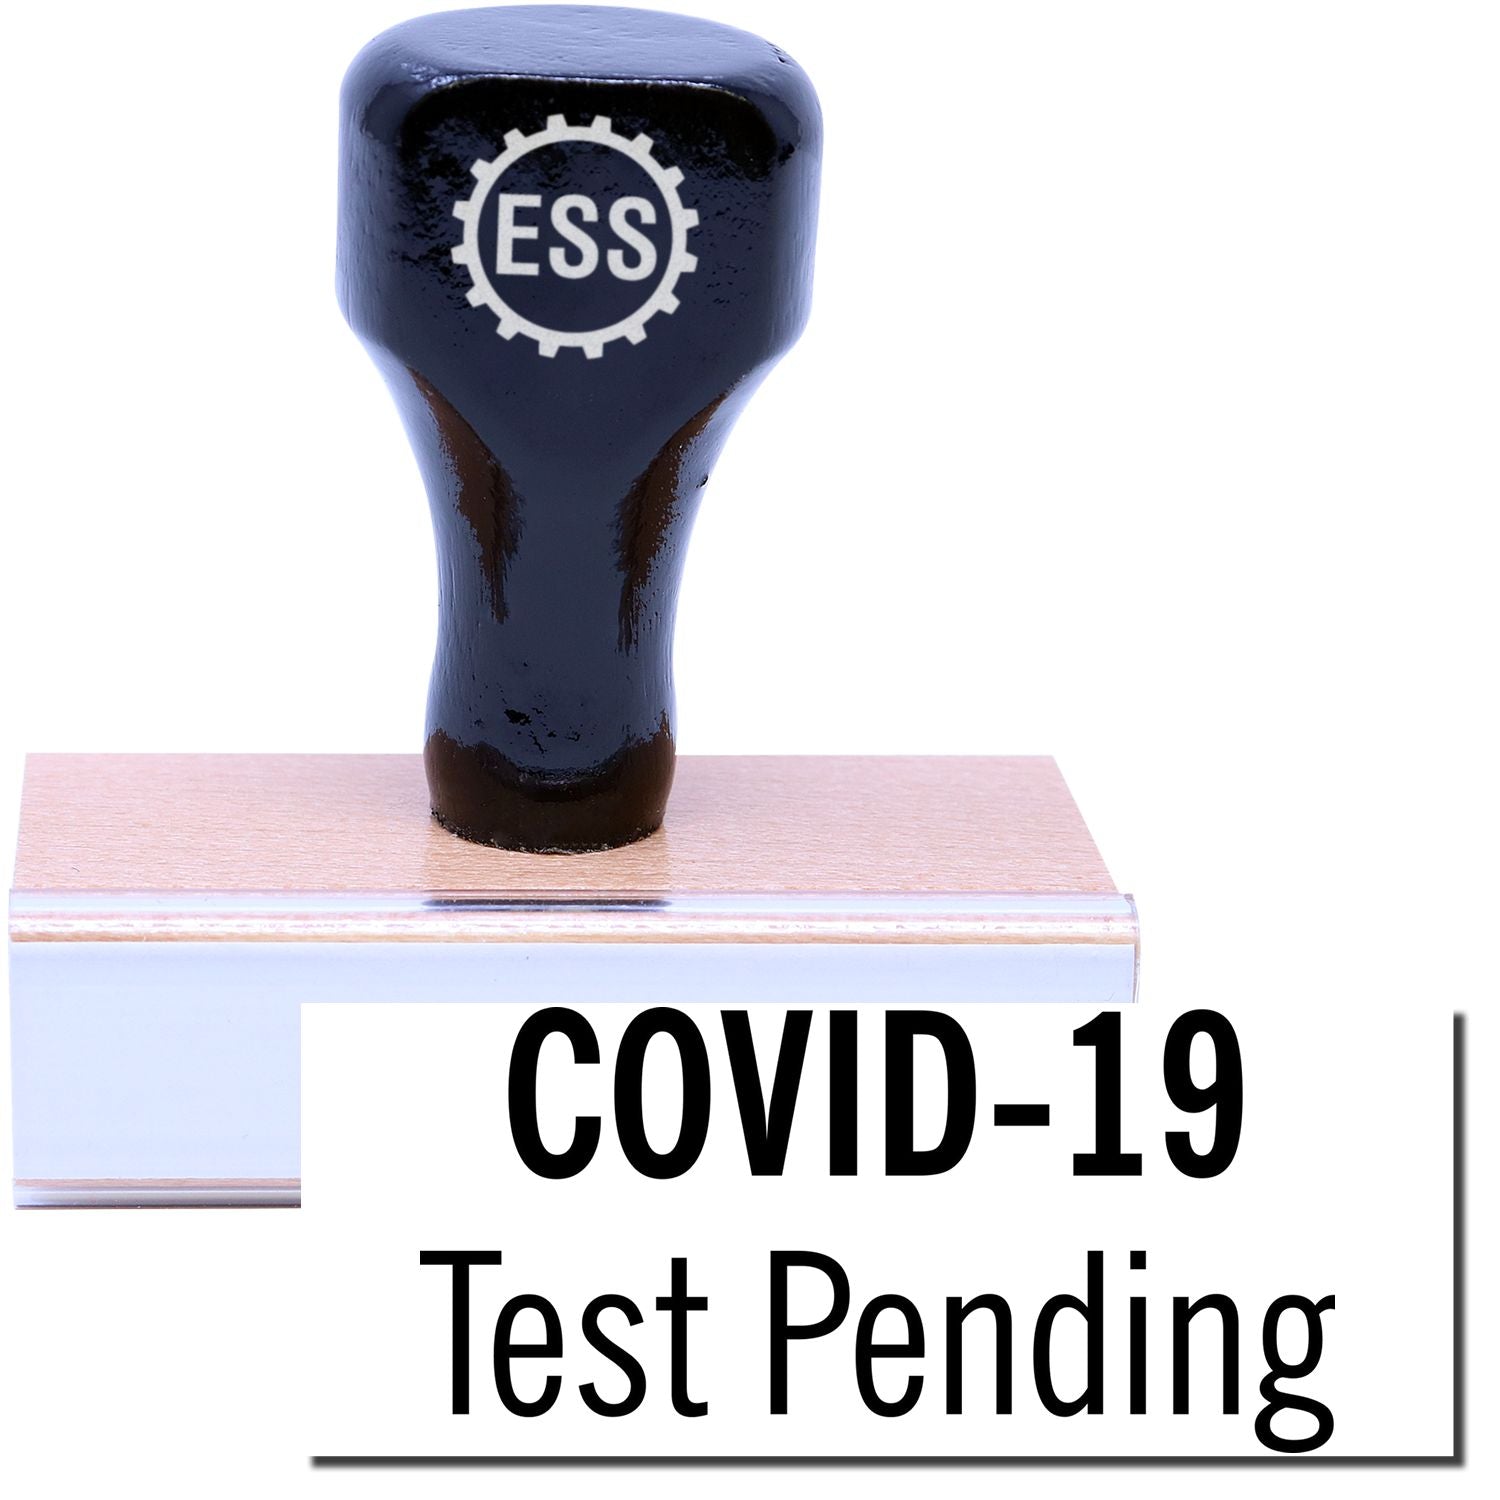 A stock office rubber stamp with a stamped image showing how the text "COVID-19 Test Pending" is displayed after stamping.